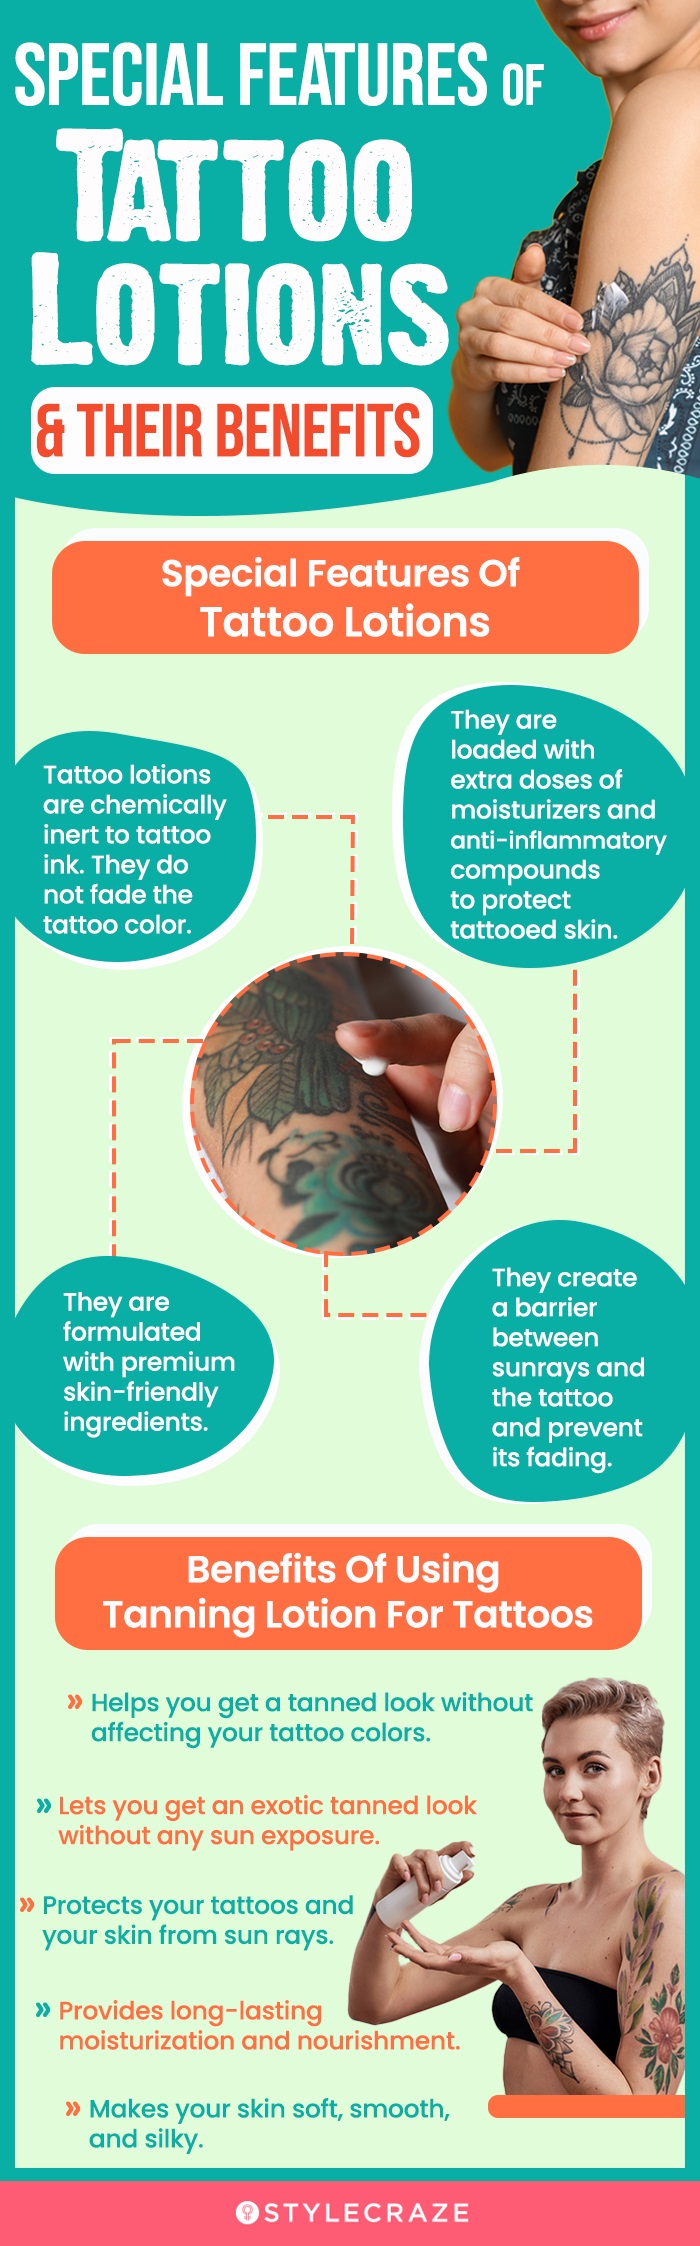 Special Features Of Tattoo Lotions & Their Benefits (infographic)